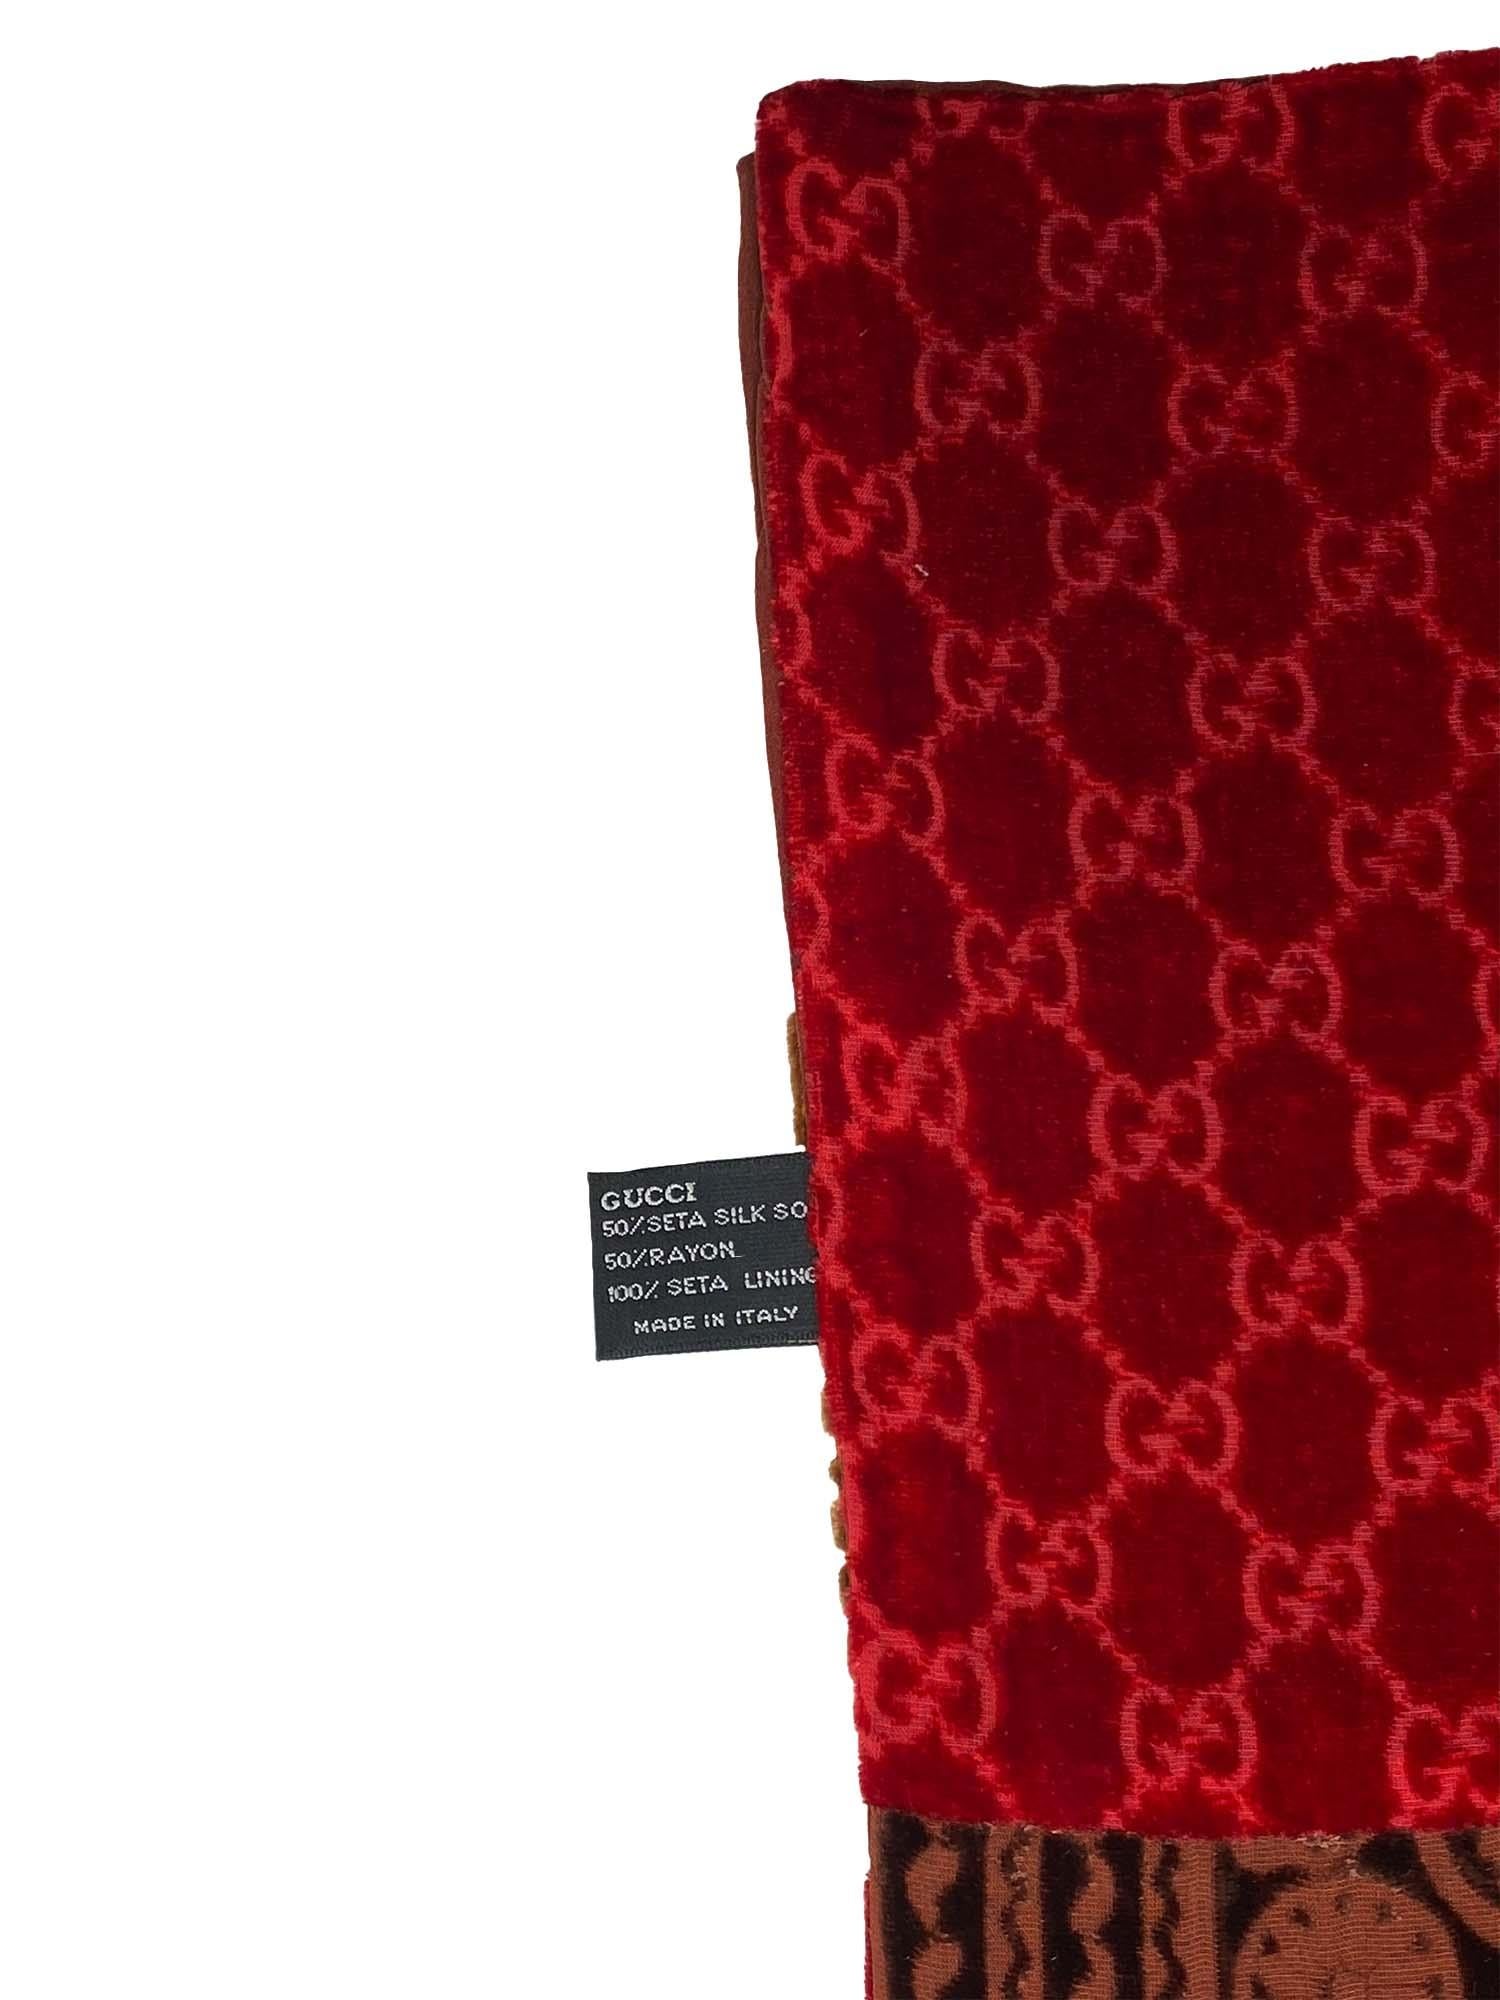 Women's or Men's F/W 1997 Gucci by Tom Ford Velvet Patchwork Red Scarf 'GG' Monogram